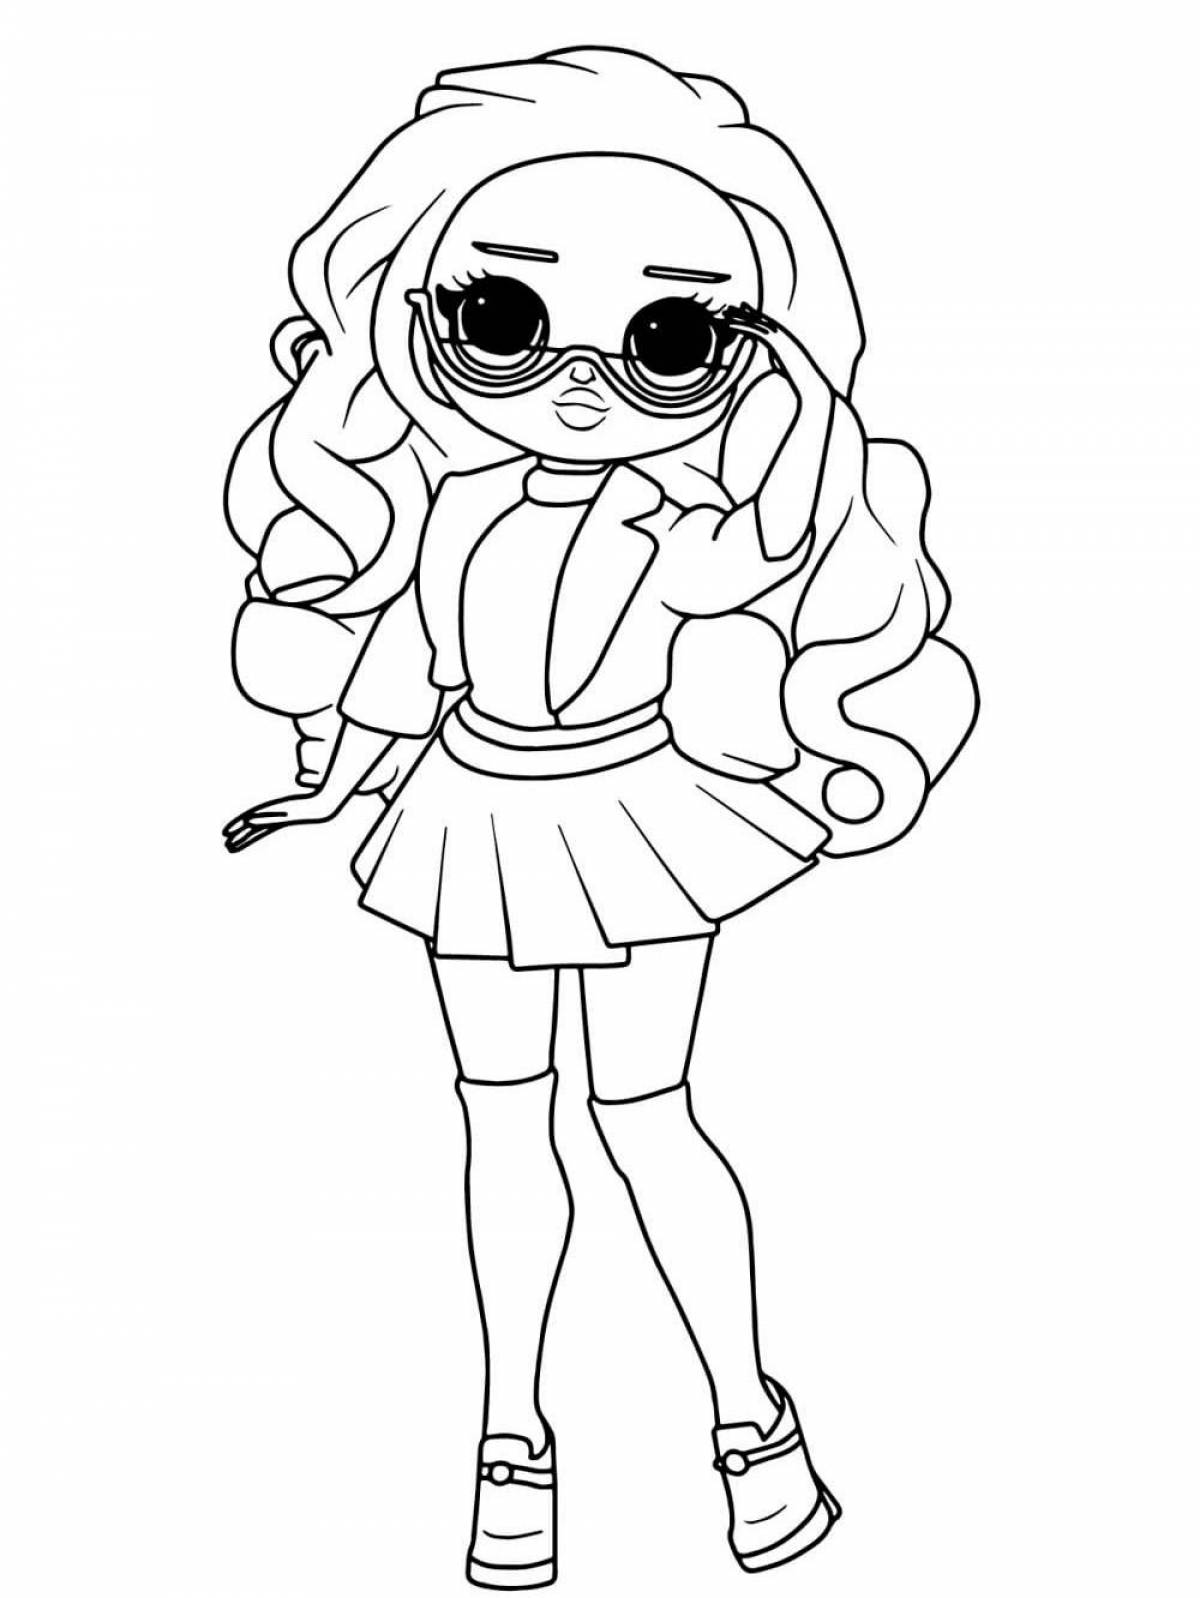 Coloring page thighs lol big